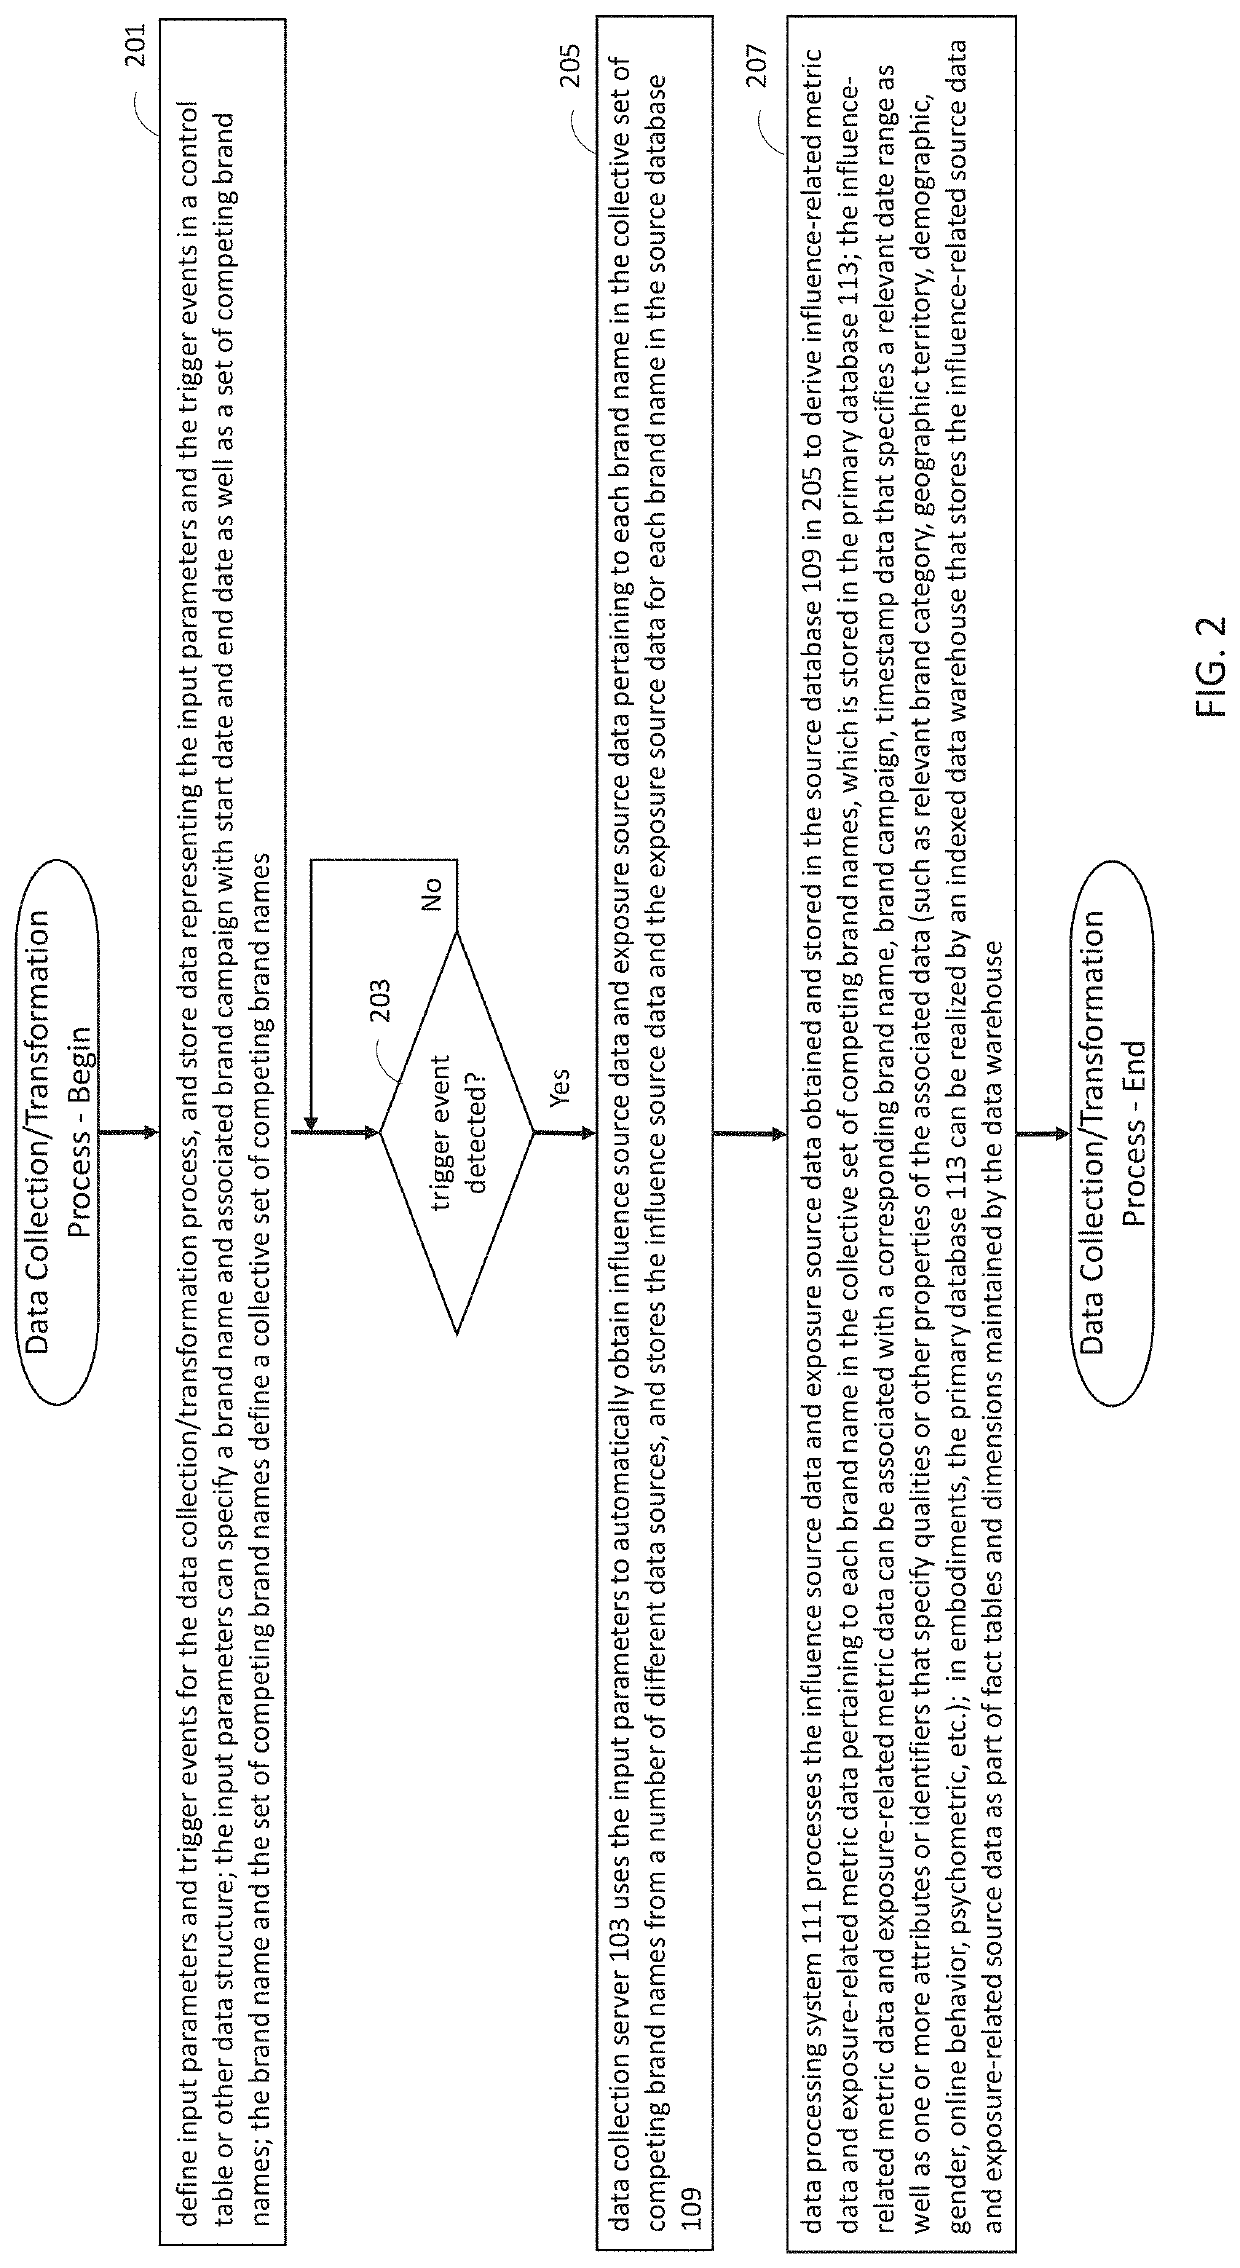 Methods and systems for monitoring brand performance based on combining disparate consumer behavior metric data and expenditure data related to a competitive brand set over time